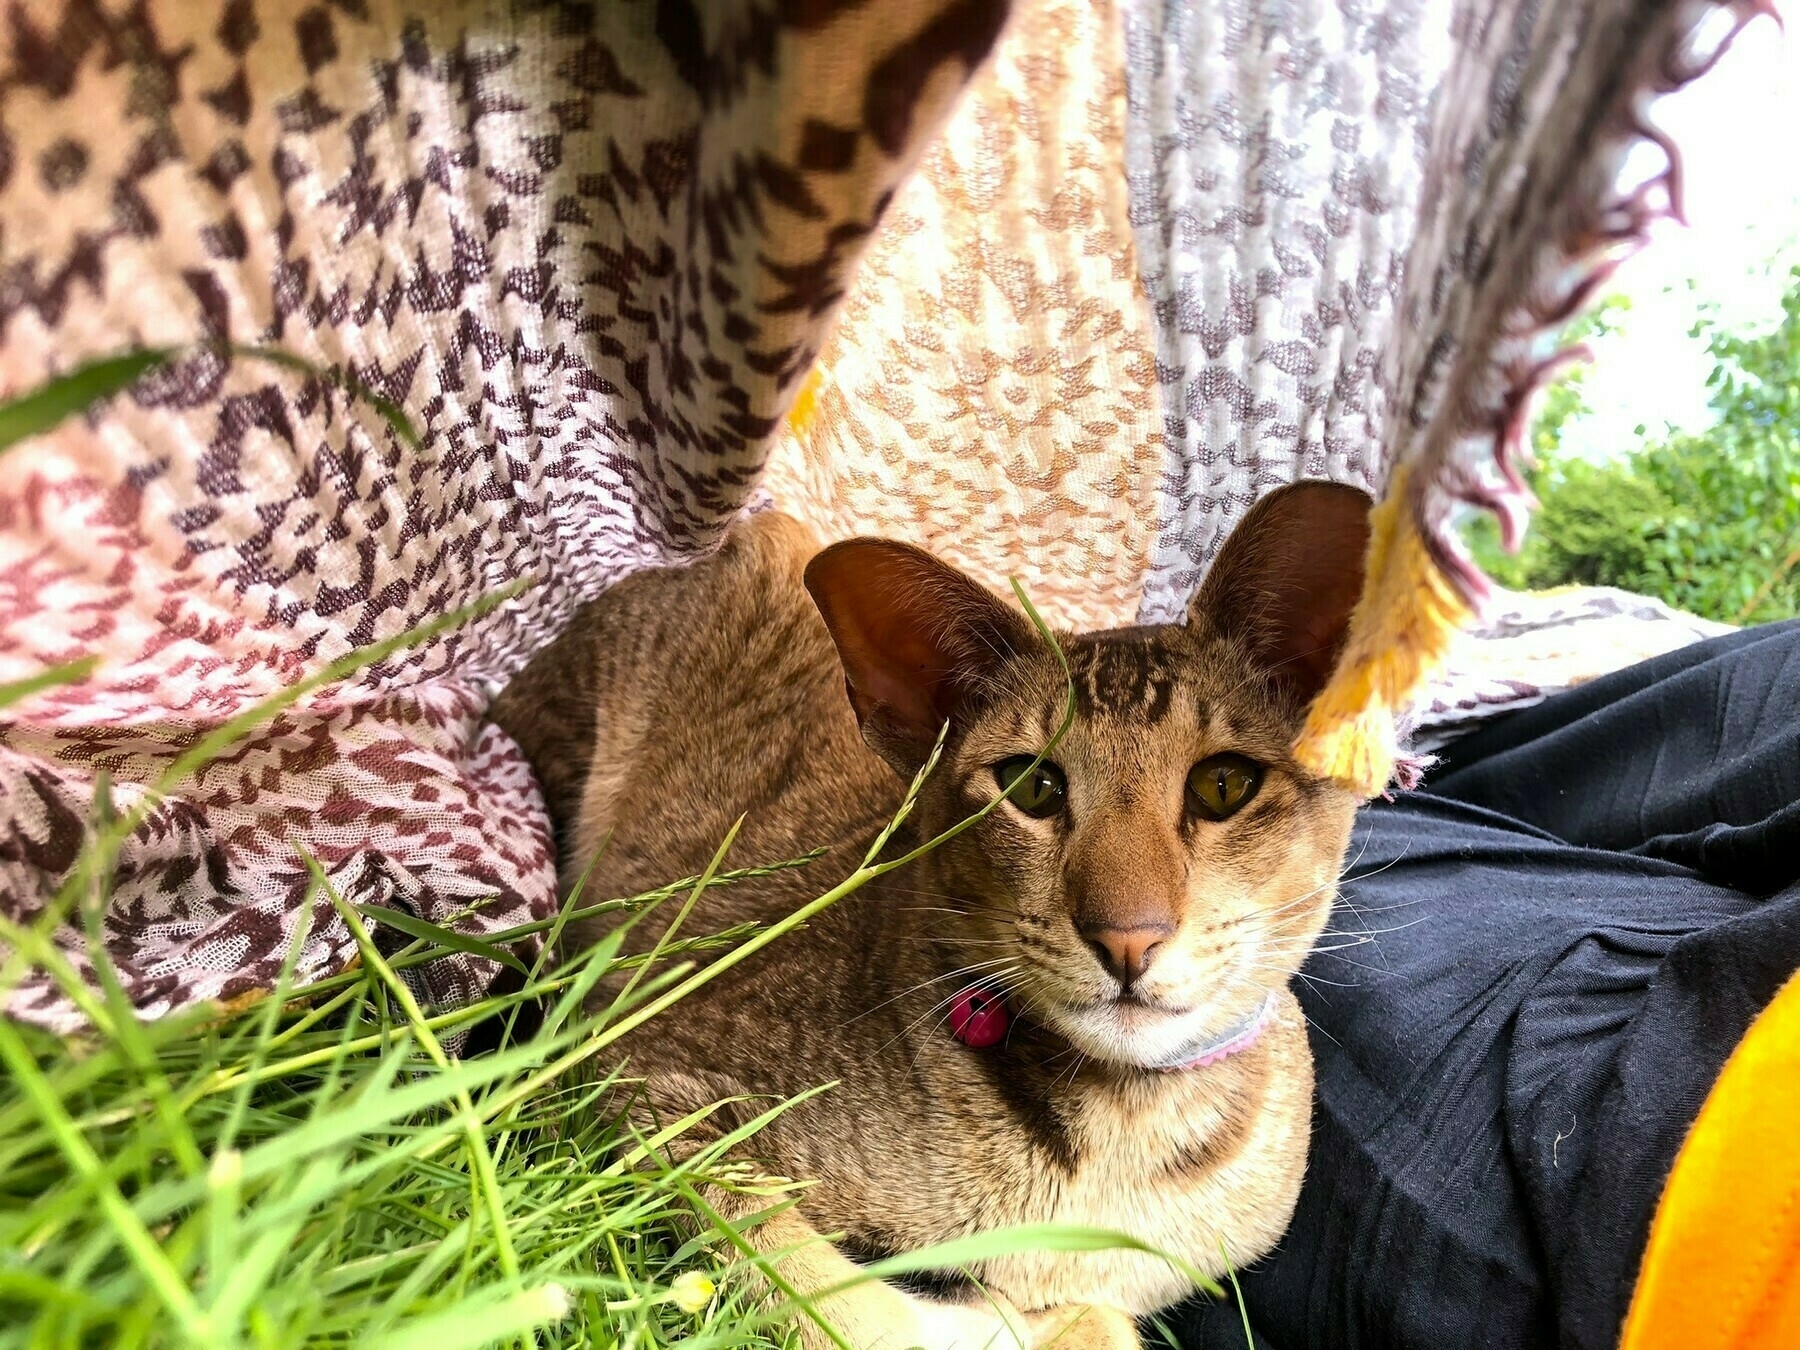 oriental cat with green eyes hiding under a blanket on the grass